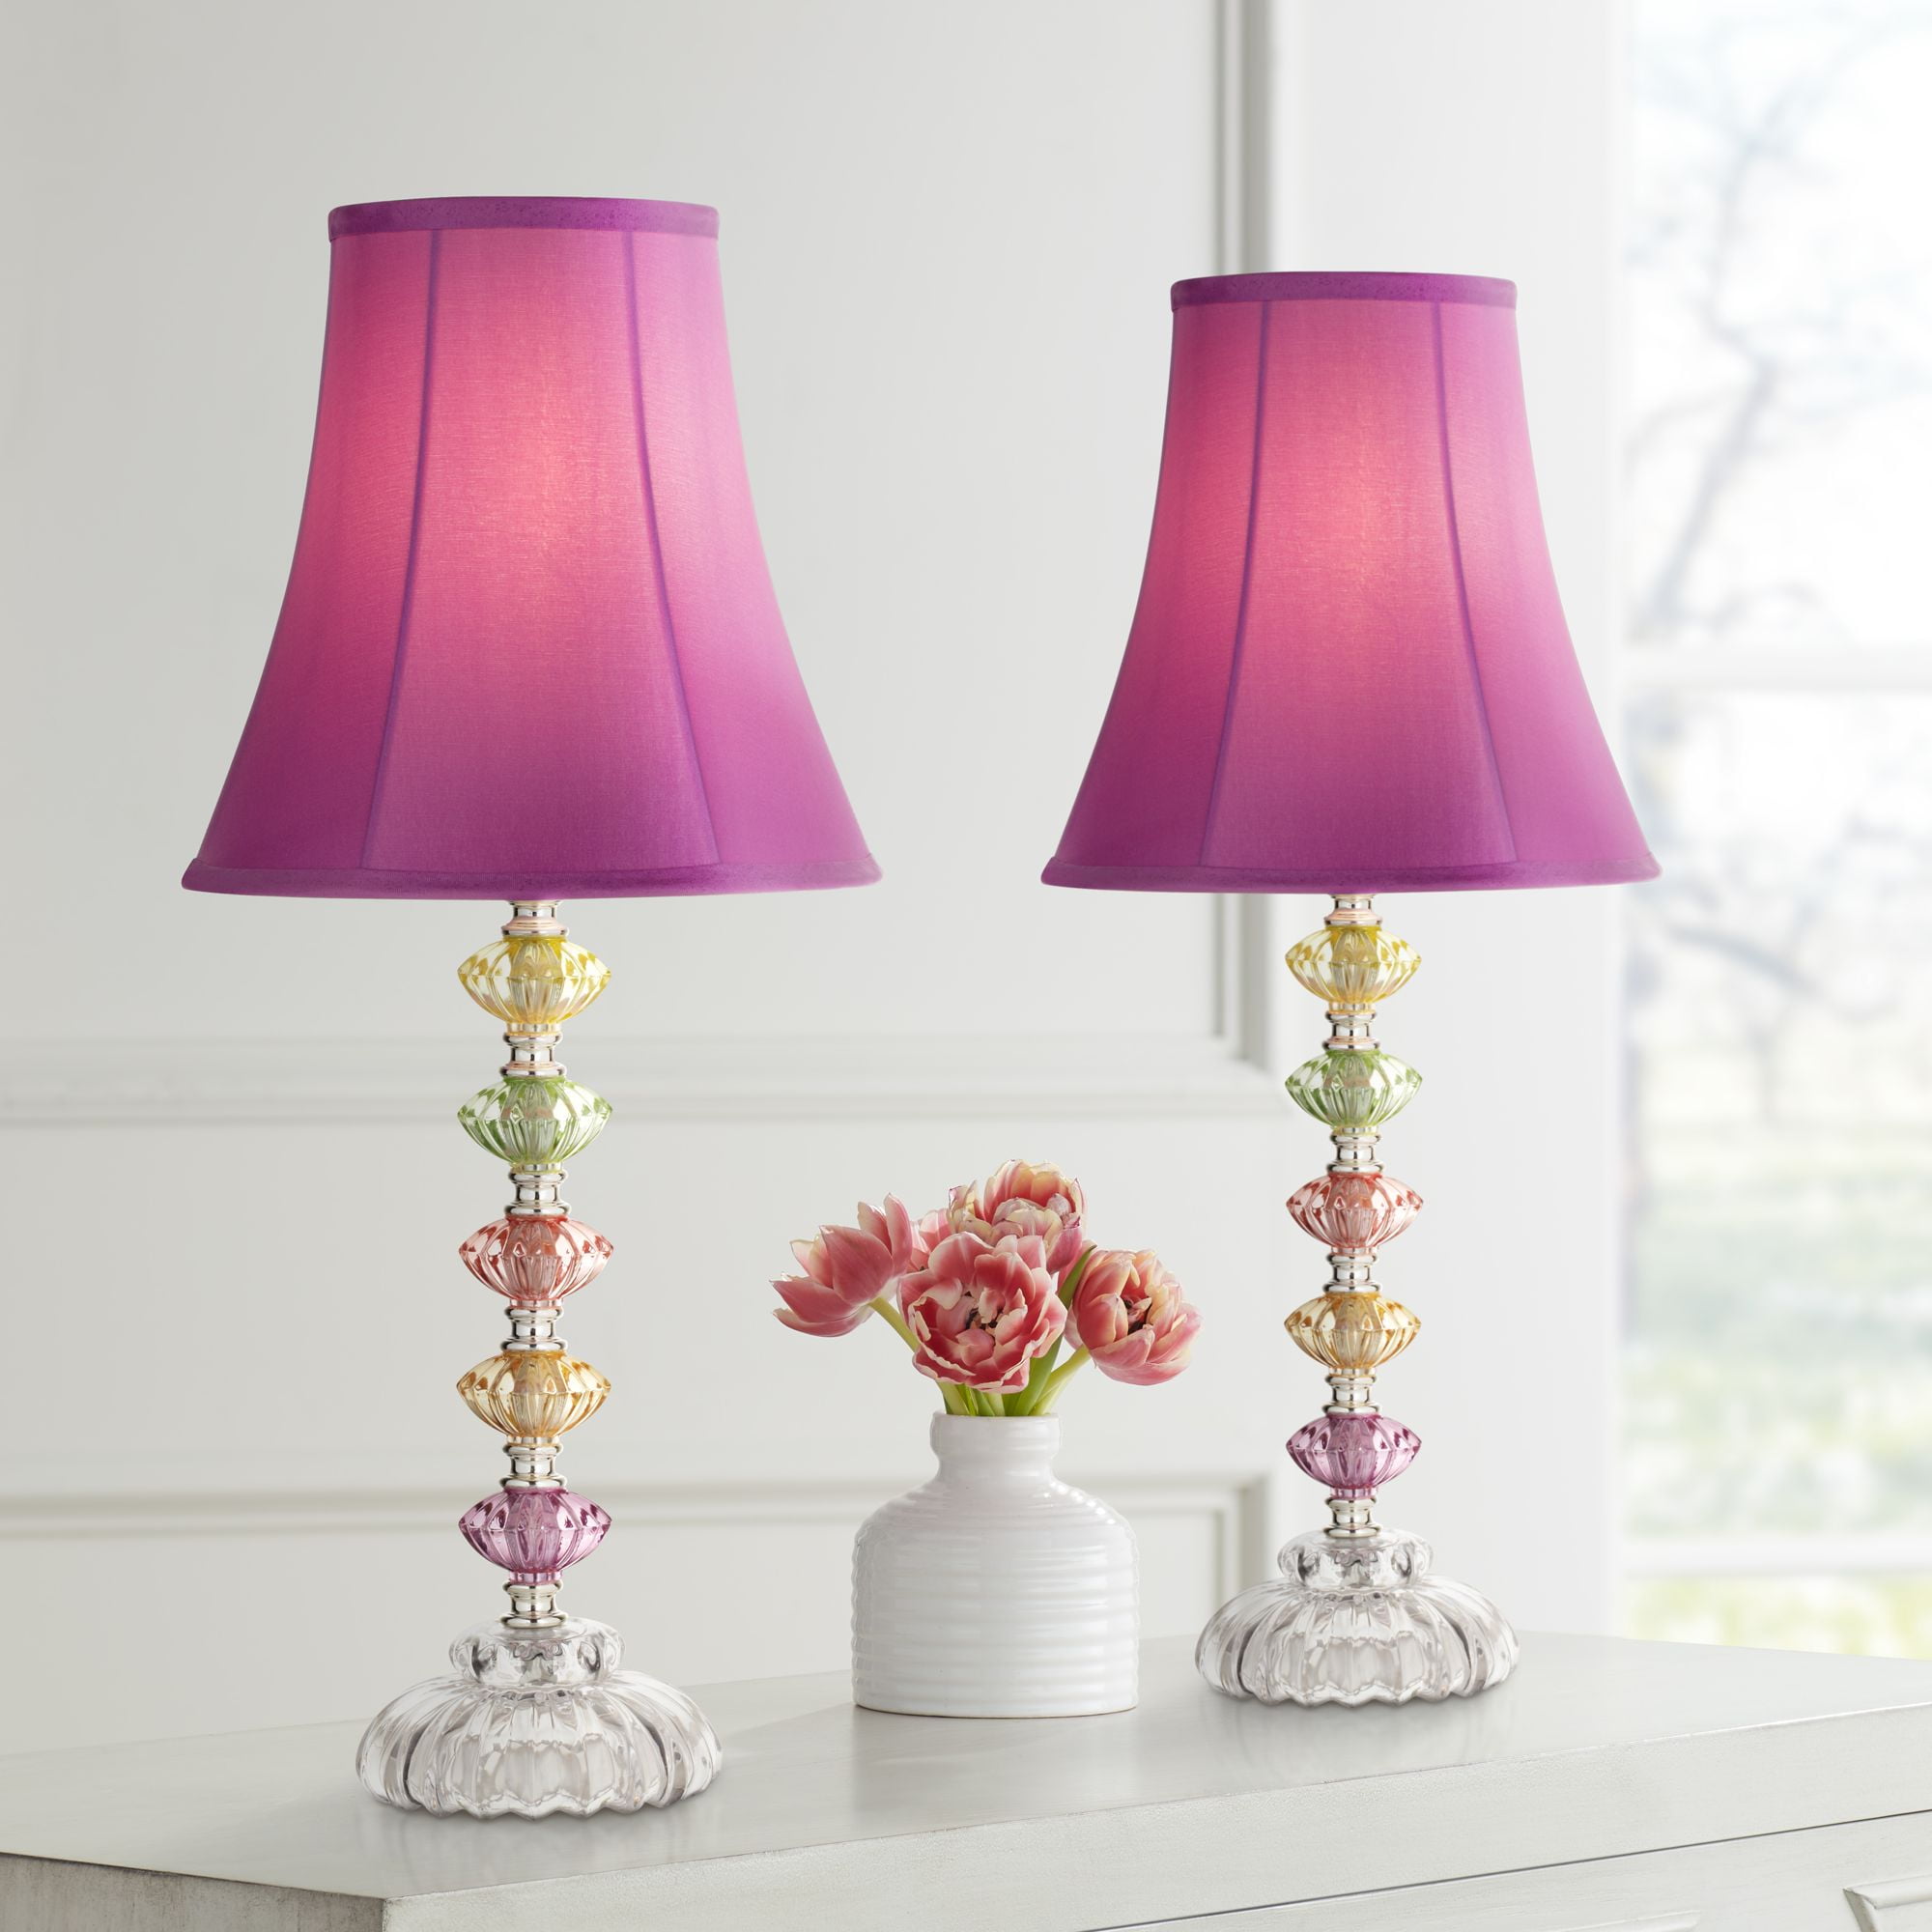 360 Lighting Bohemian Accent Table, Pink Glass Table Lamp Shade